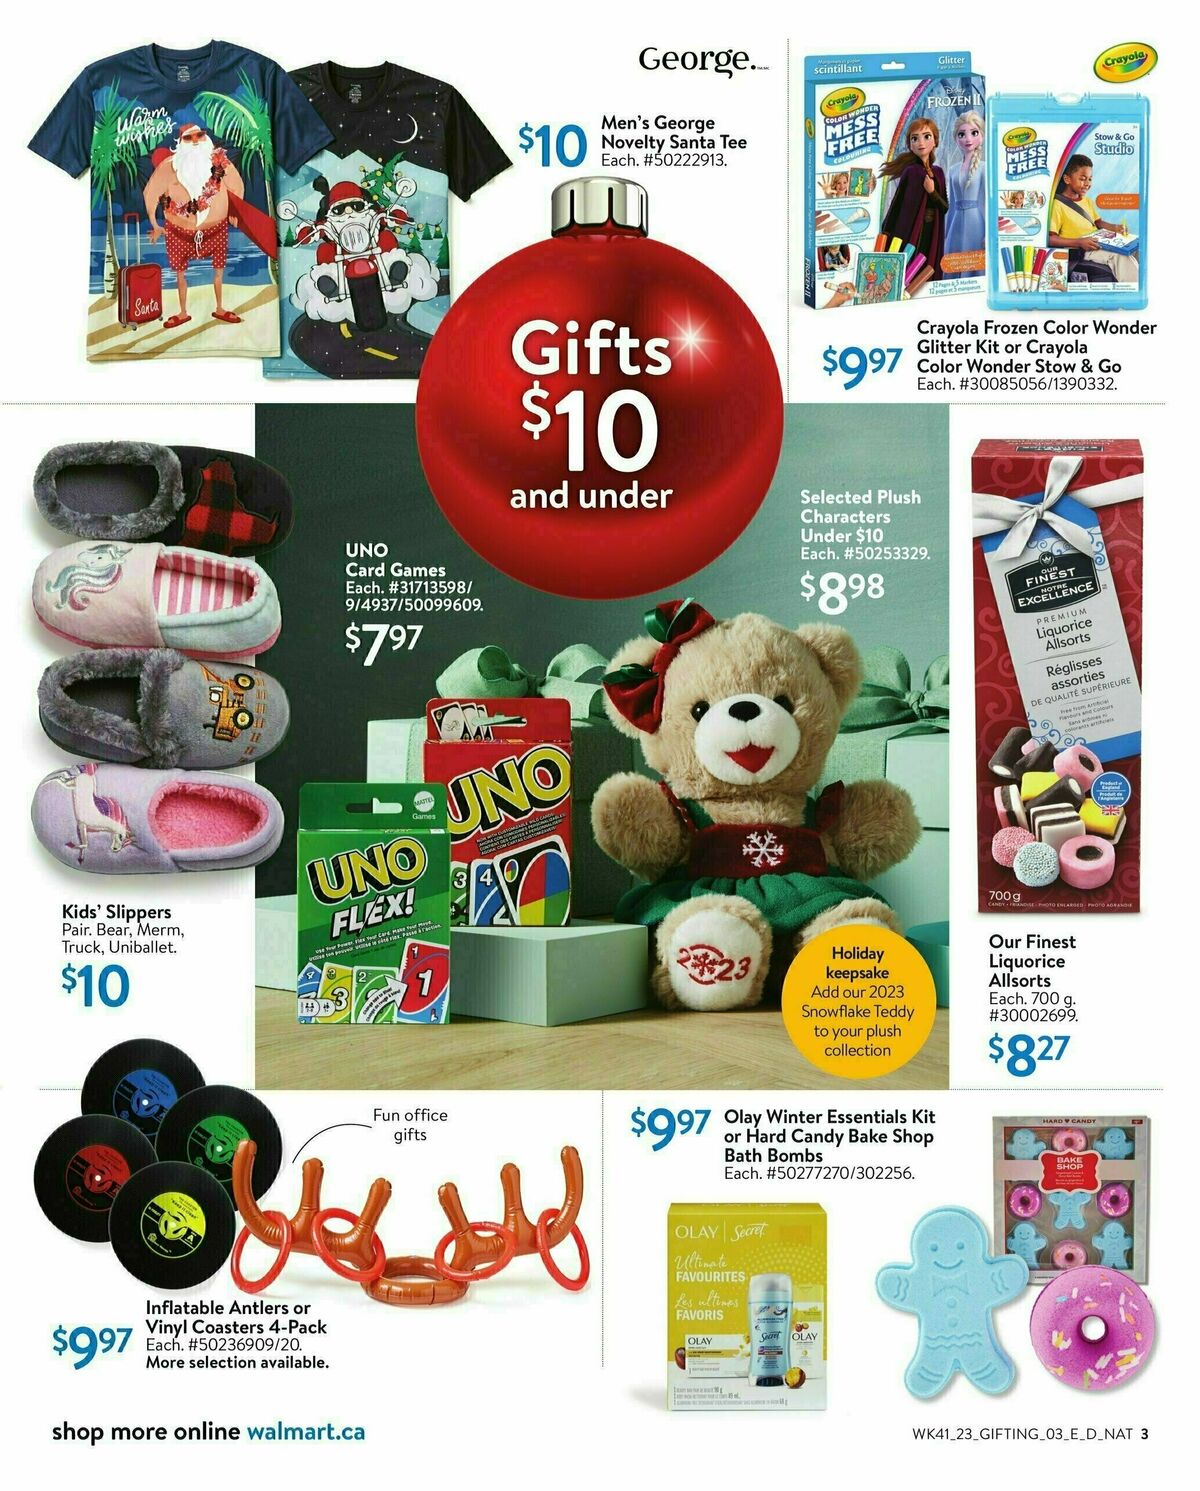 Walmart Gifting Guide Flyer from November 2